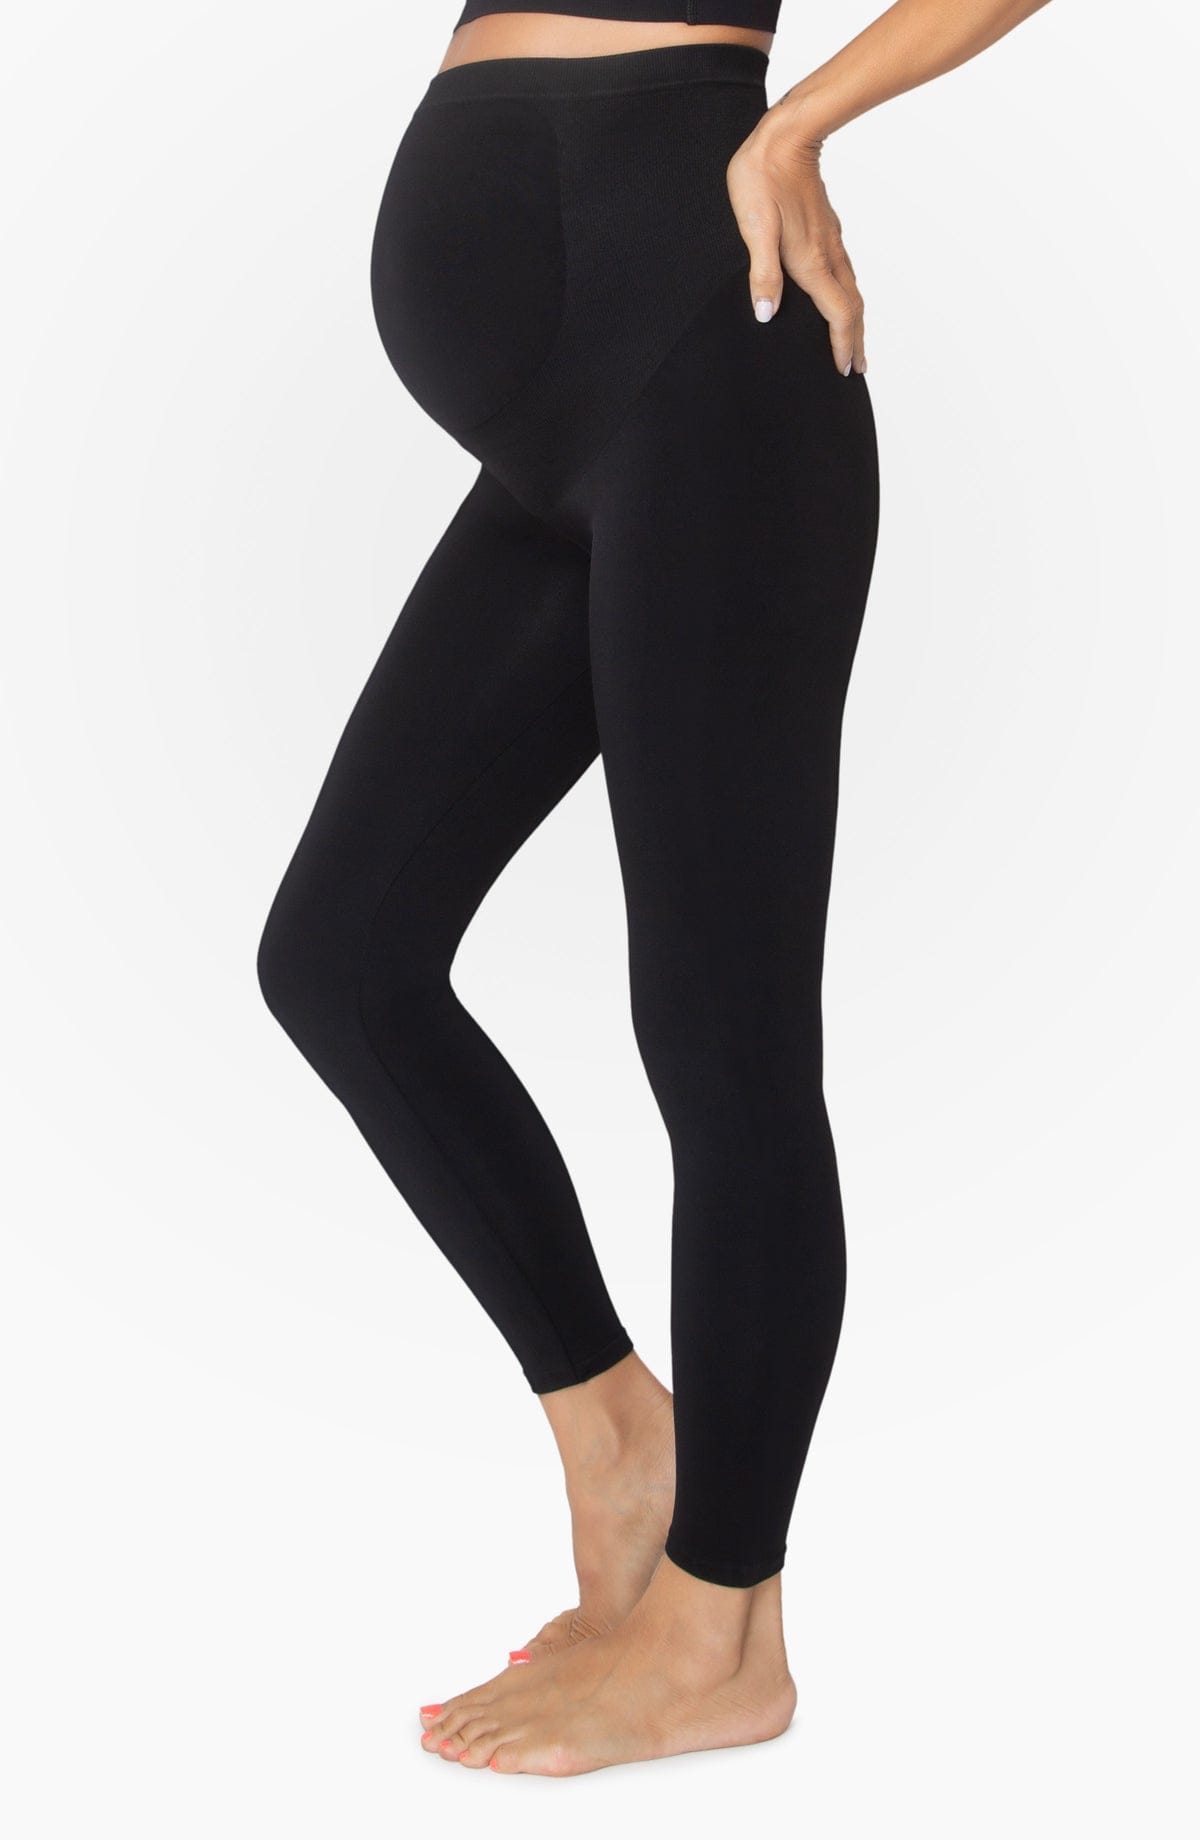 Belly Bandit Maternity Bump Support Leggings – A Mother's Haven